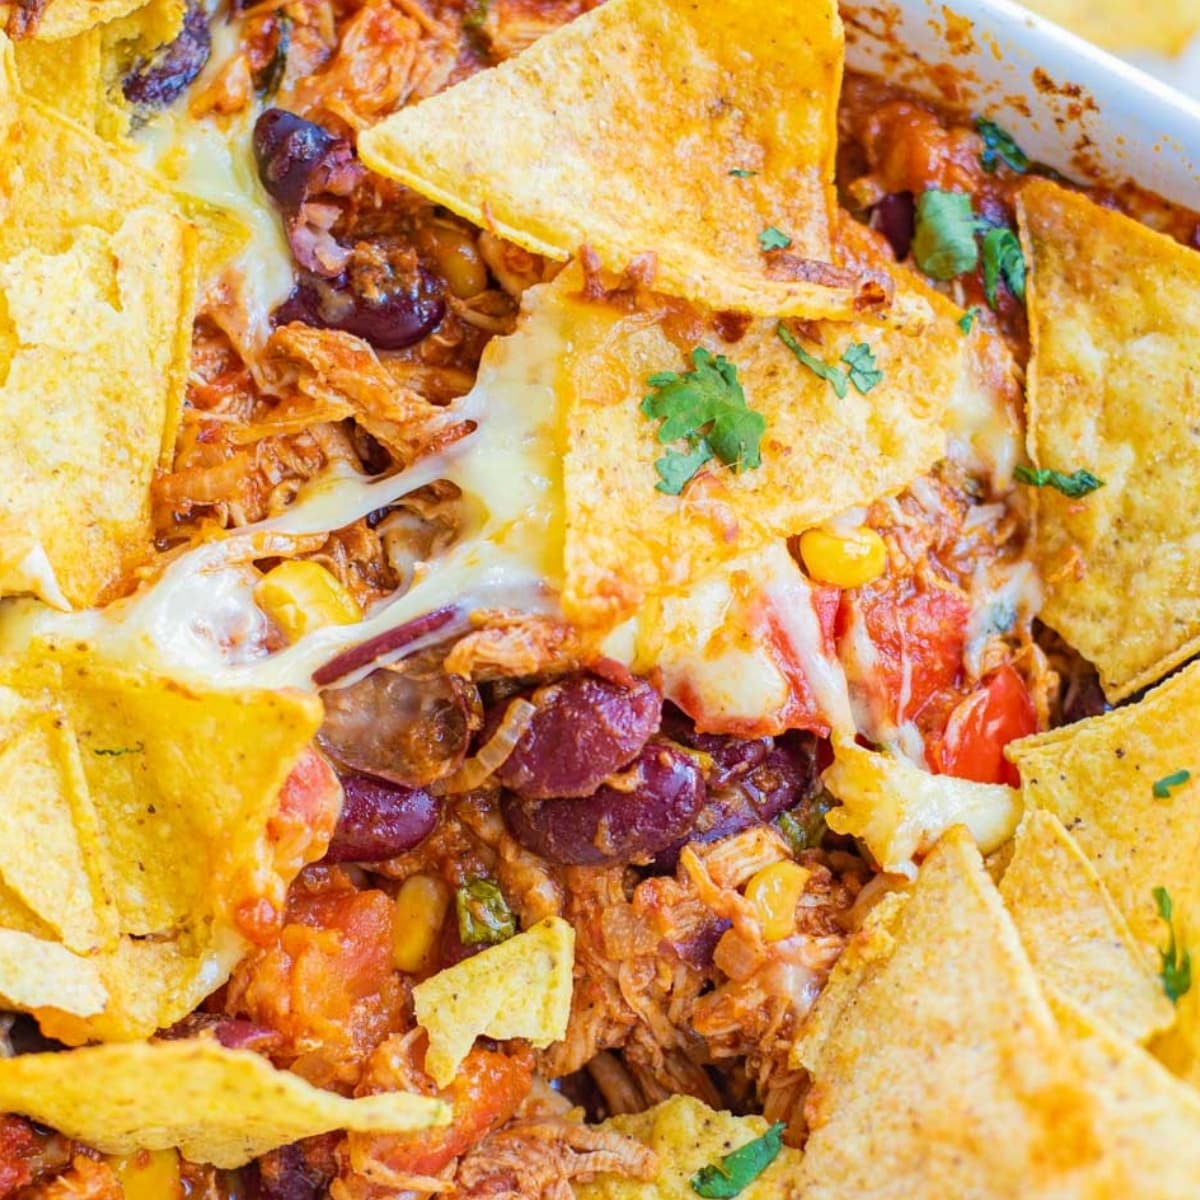 cheesy Doritos with chicken, beans, cilantro and tomatoes